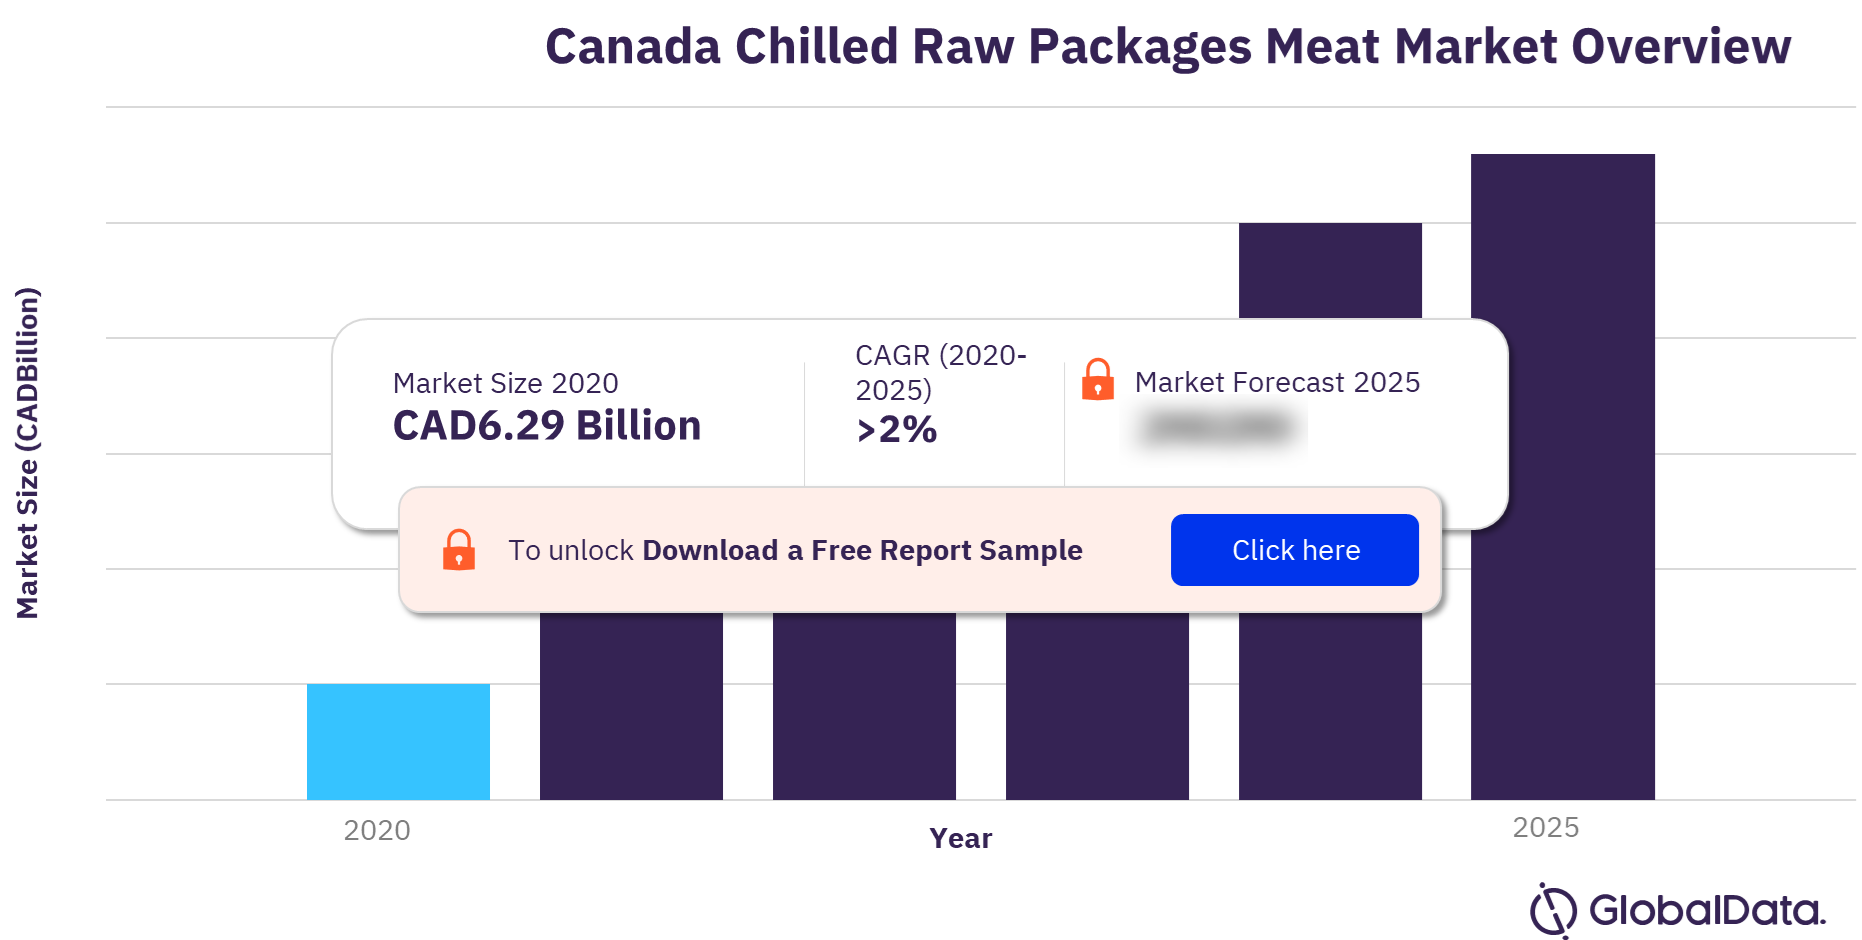 Canada chilled raw packaged meat market outlook